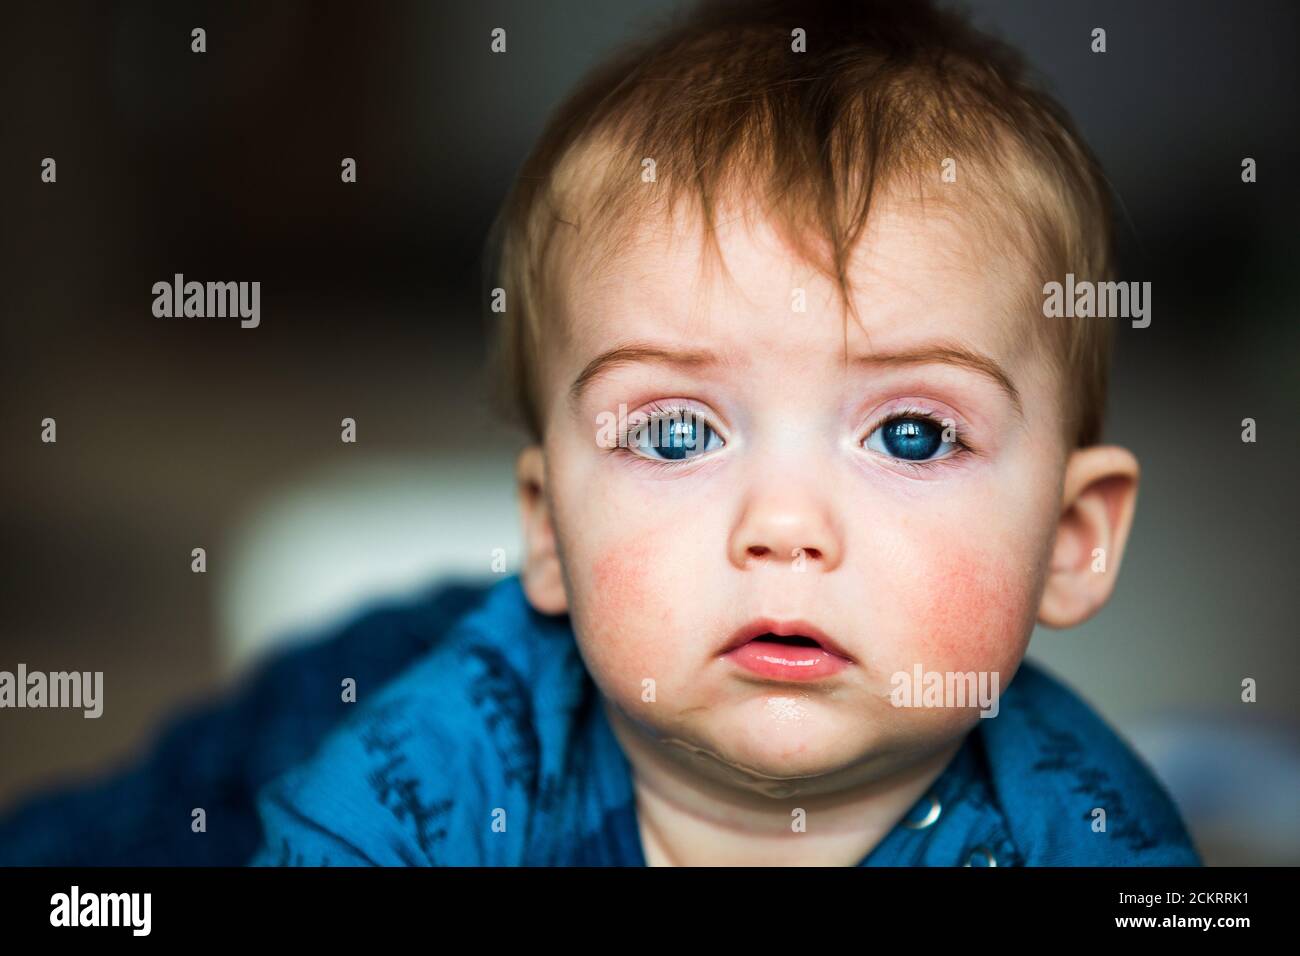 Close-up of 6-8 month old baby boy looking straight ahead with a sincere expression Stock Photo